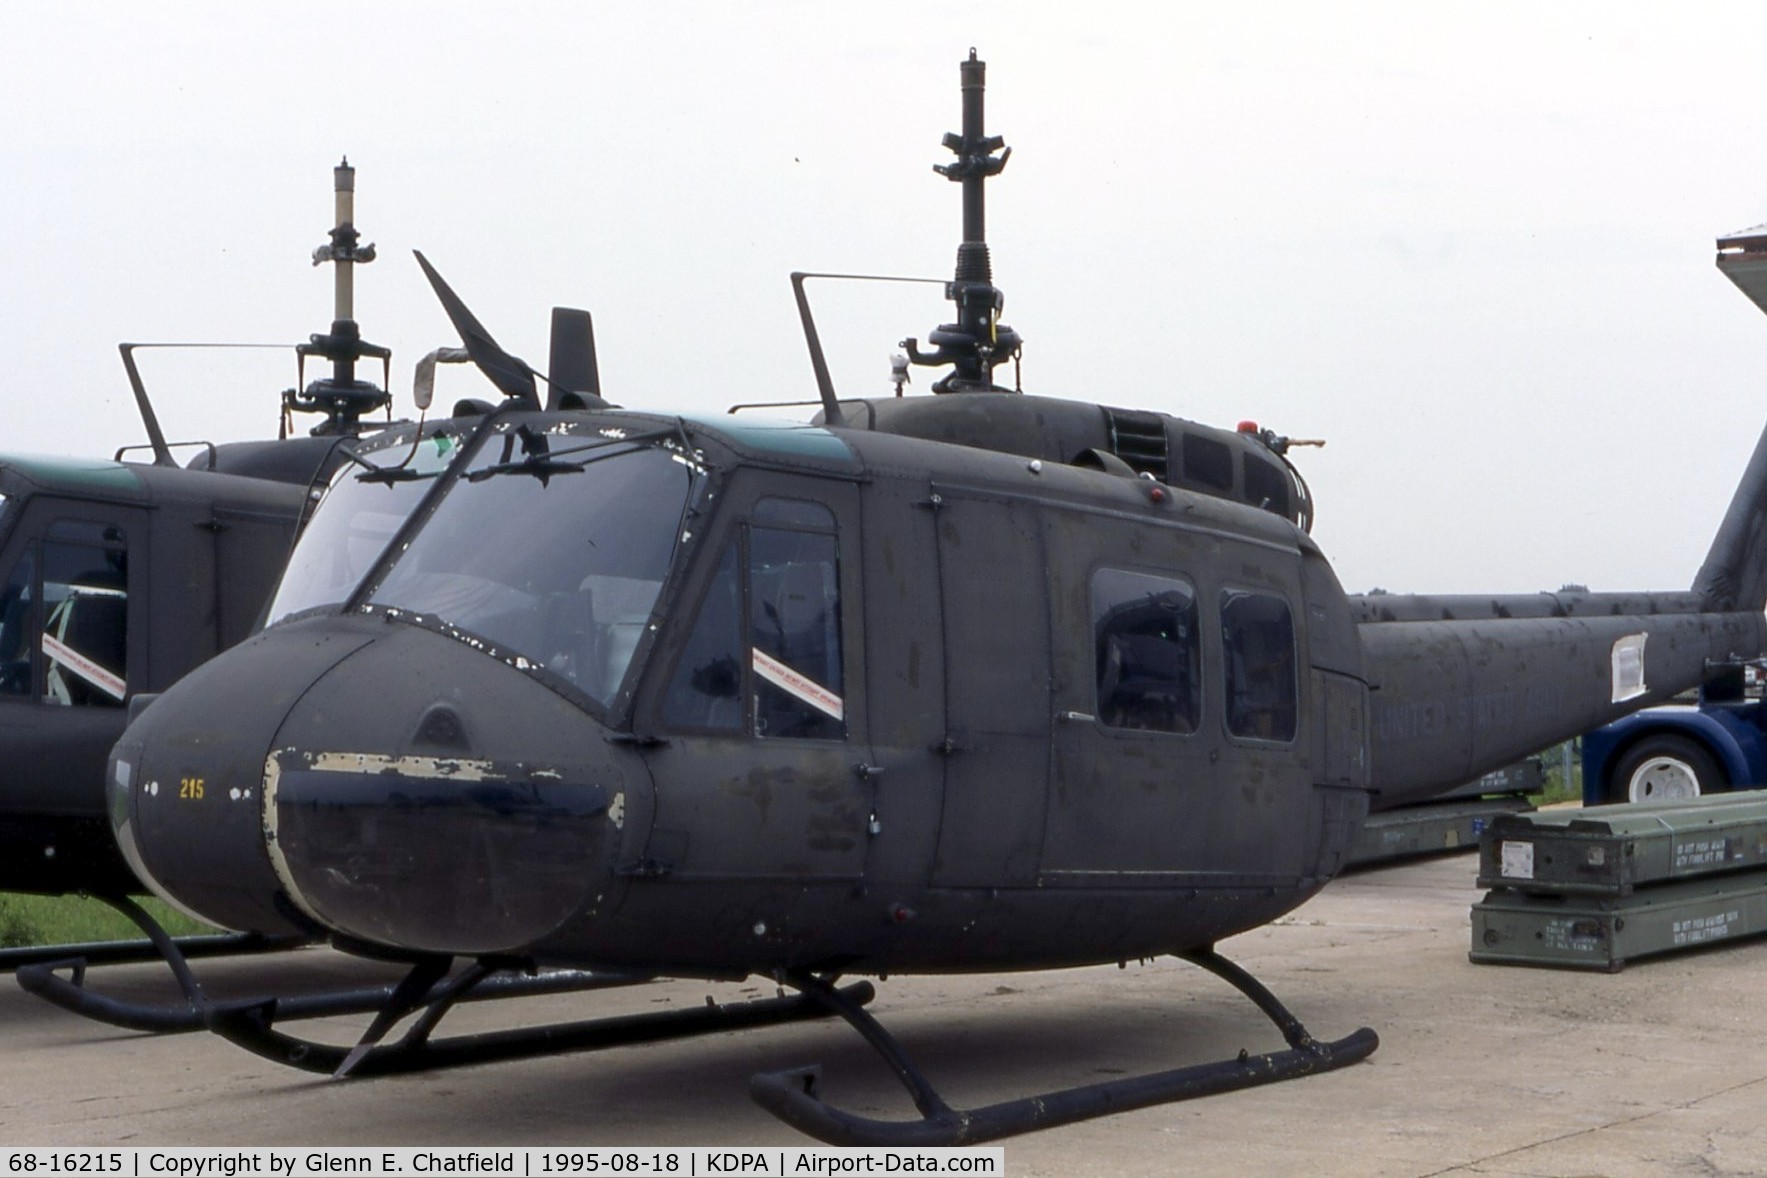 68-16215, 1968 Bell UH-1H Iroquois C/N 10874, UH-1H with Air Classics Museum, at the time located at DuPage Airport.